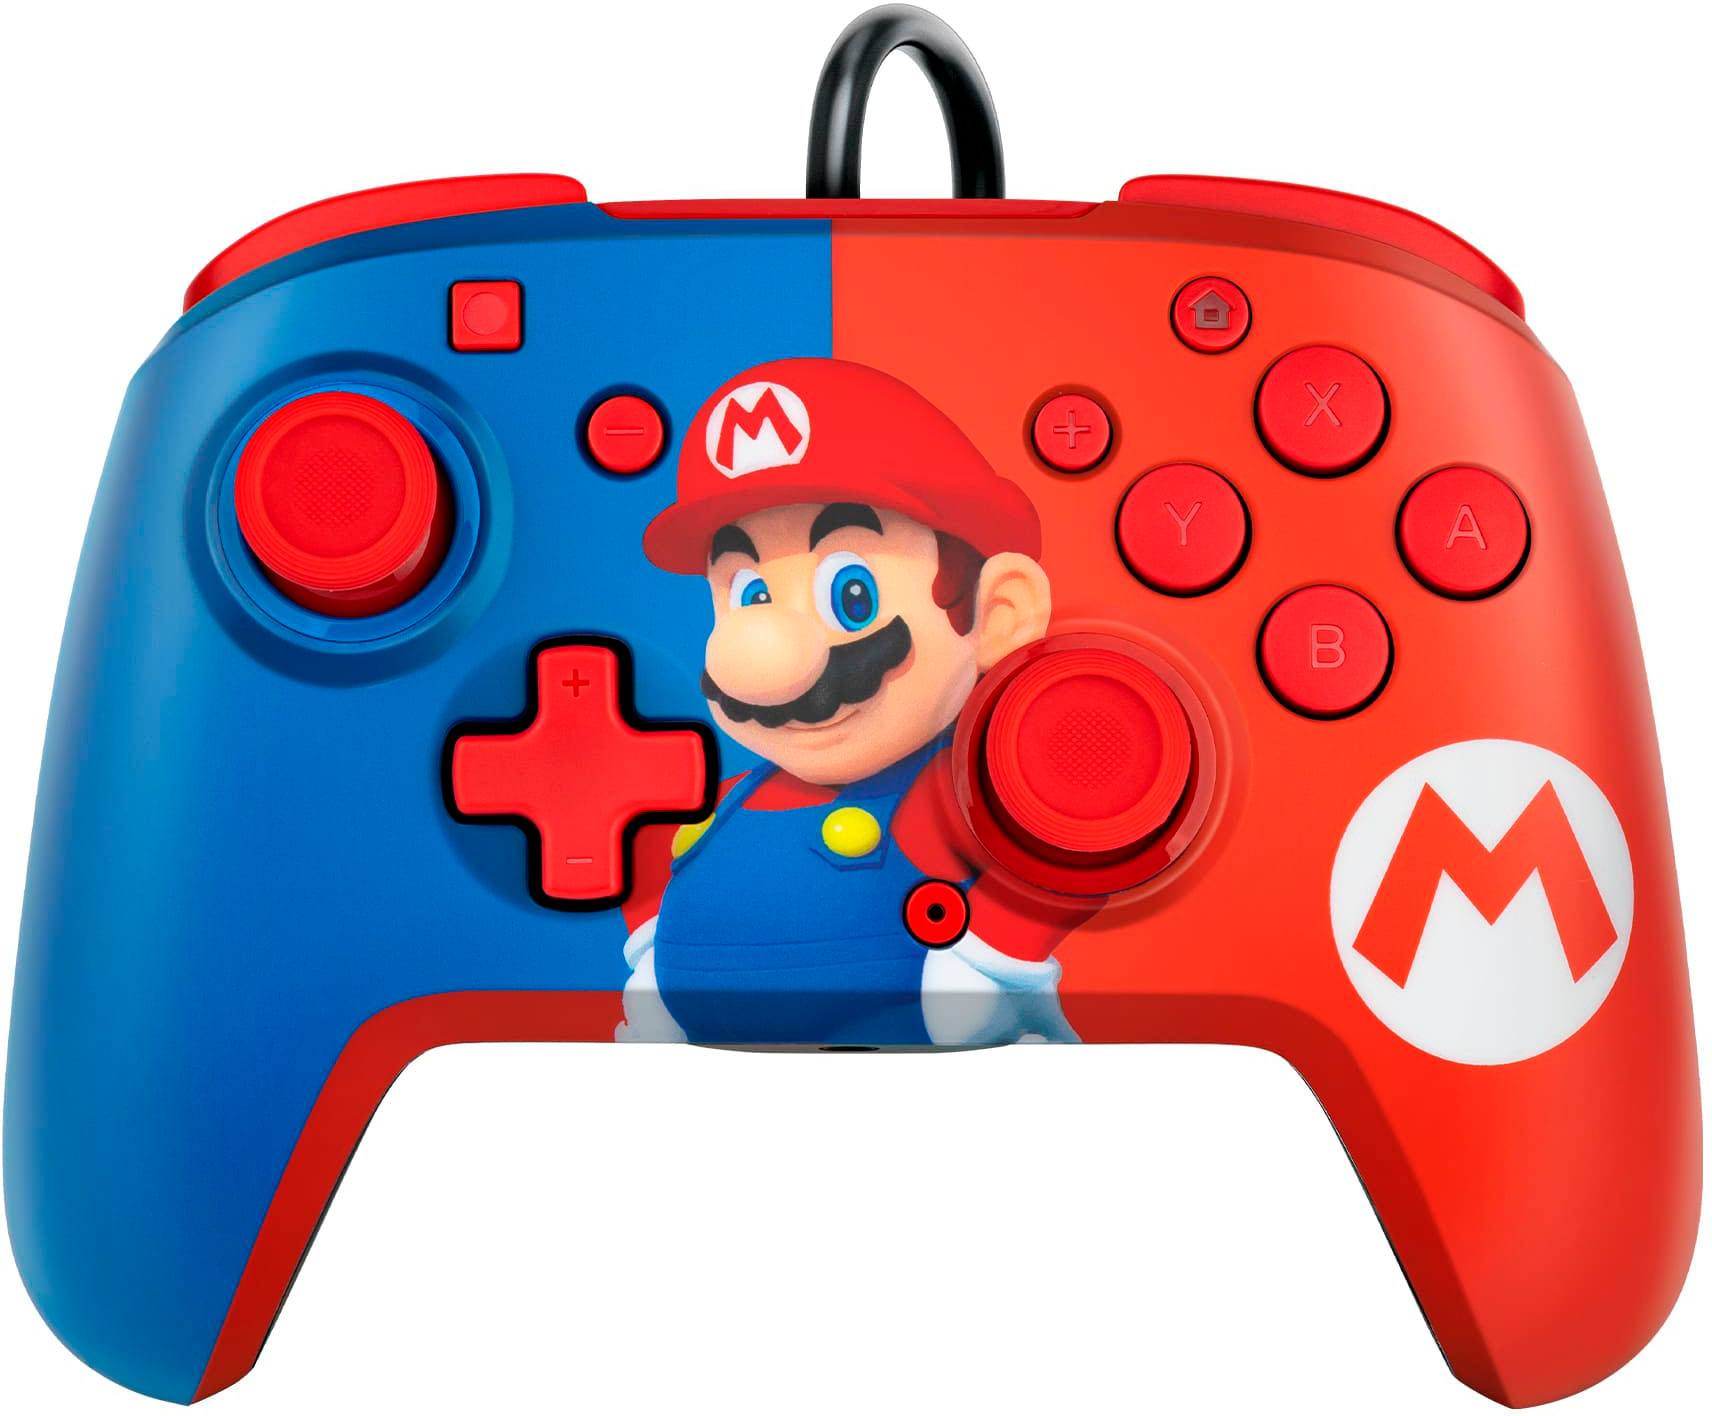 ⭐NEW Limited Edition Nintendo Switch OLED Special Super Mario RED Edition⭐